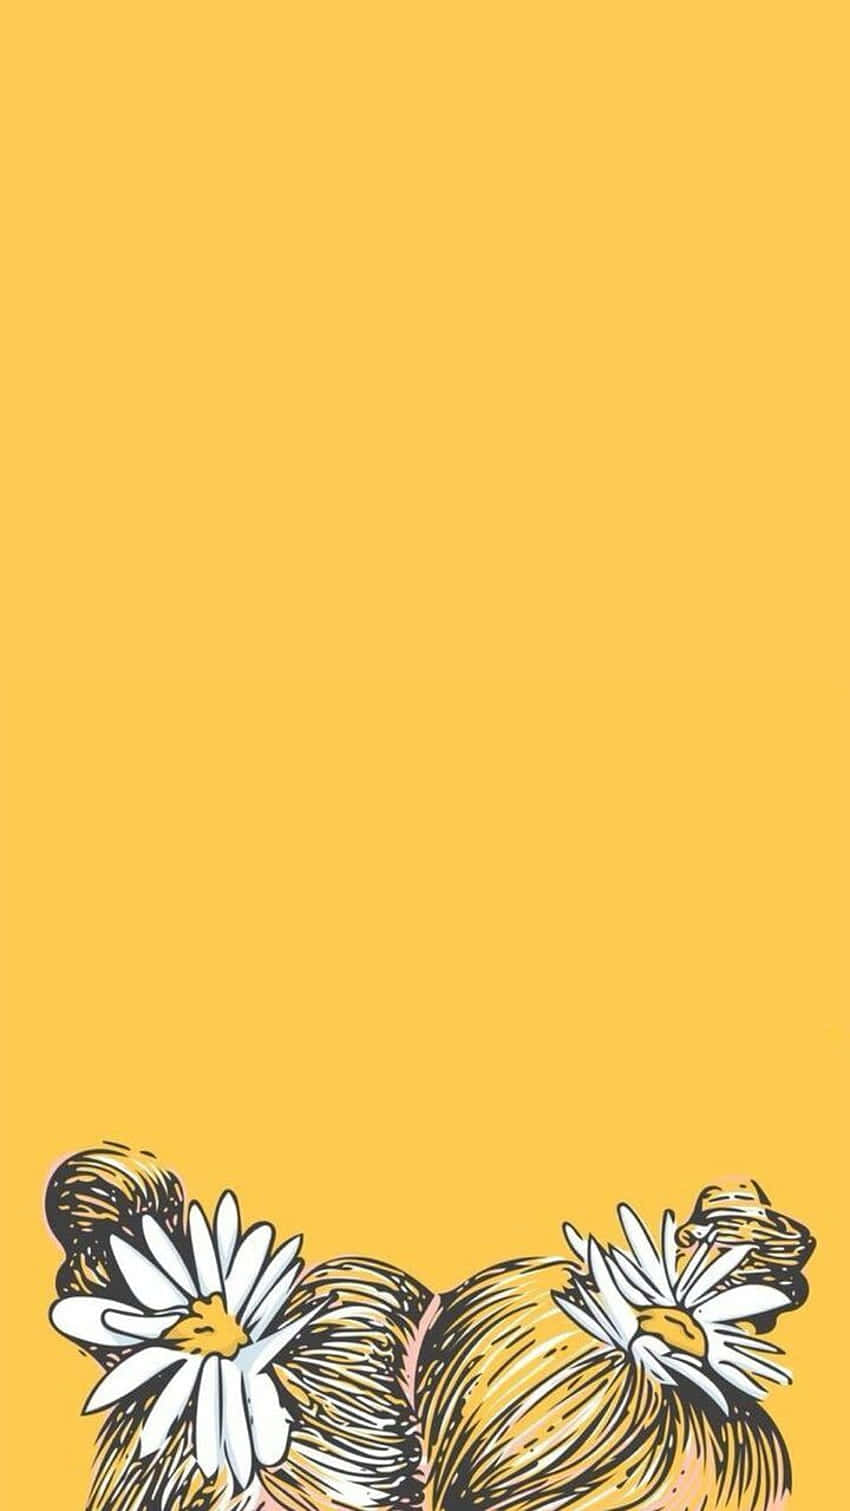 Spreading Positivity In This Summer With Cool Yellow Background